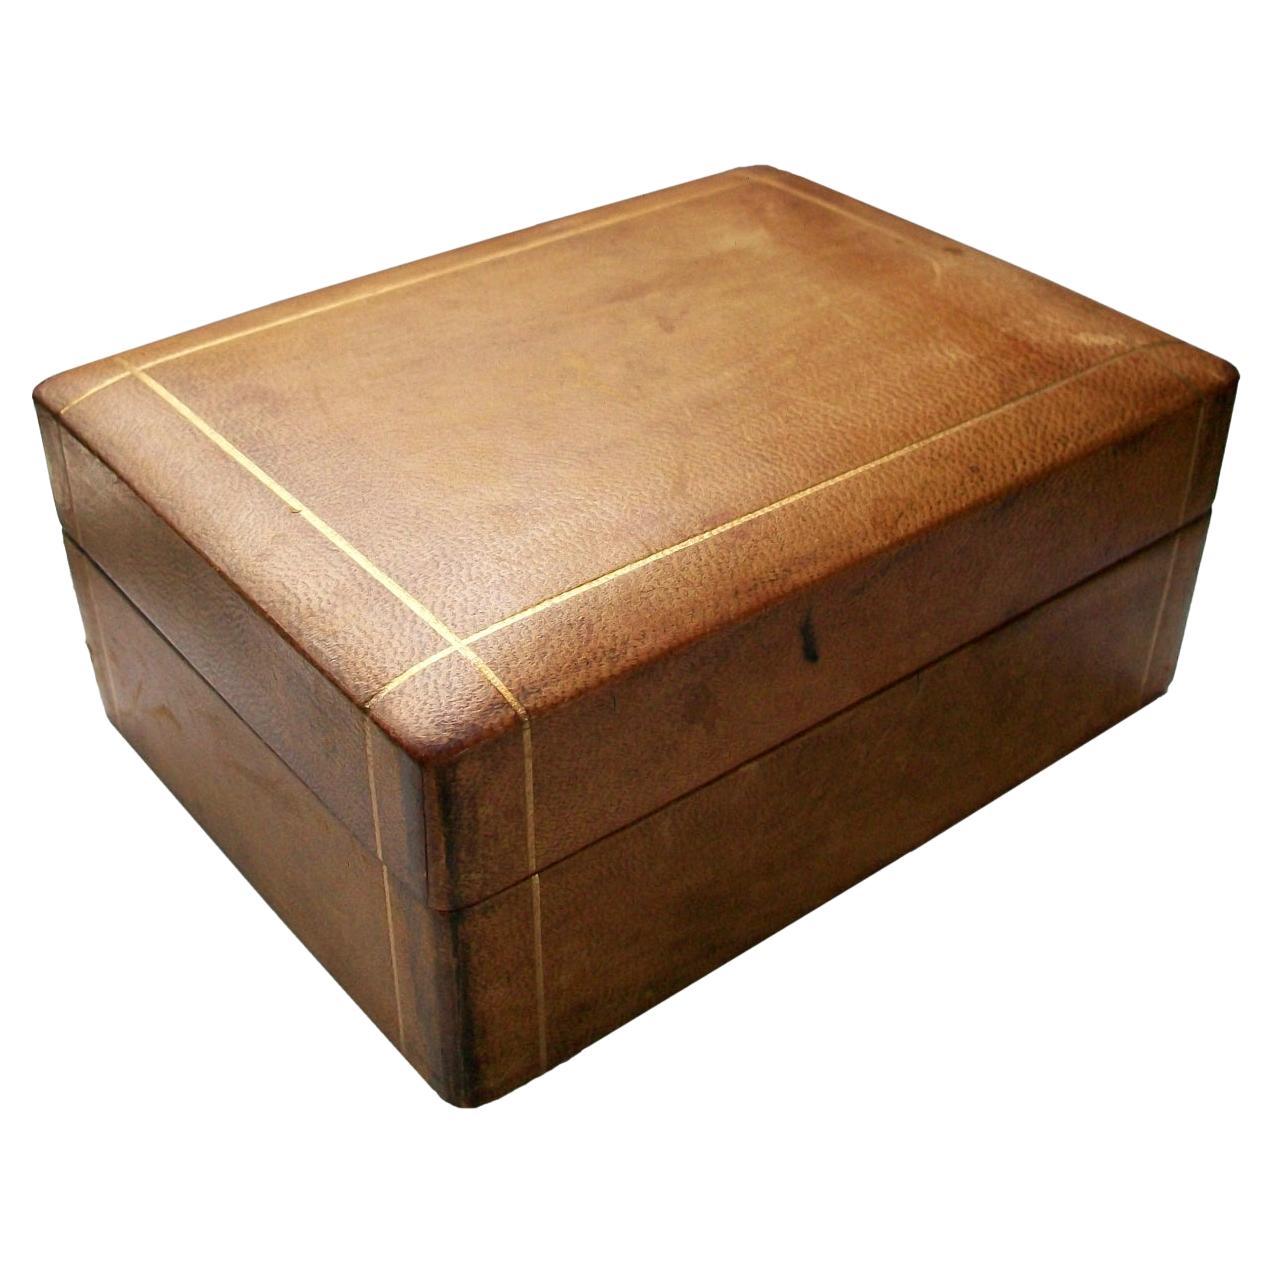 Midcentury Leather Box - Gilded Details - Wood Lined - Italy - circa 1950s For Sale